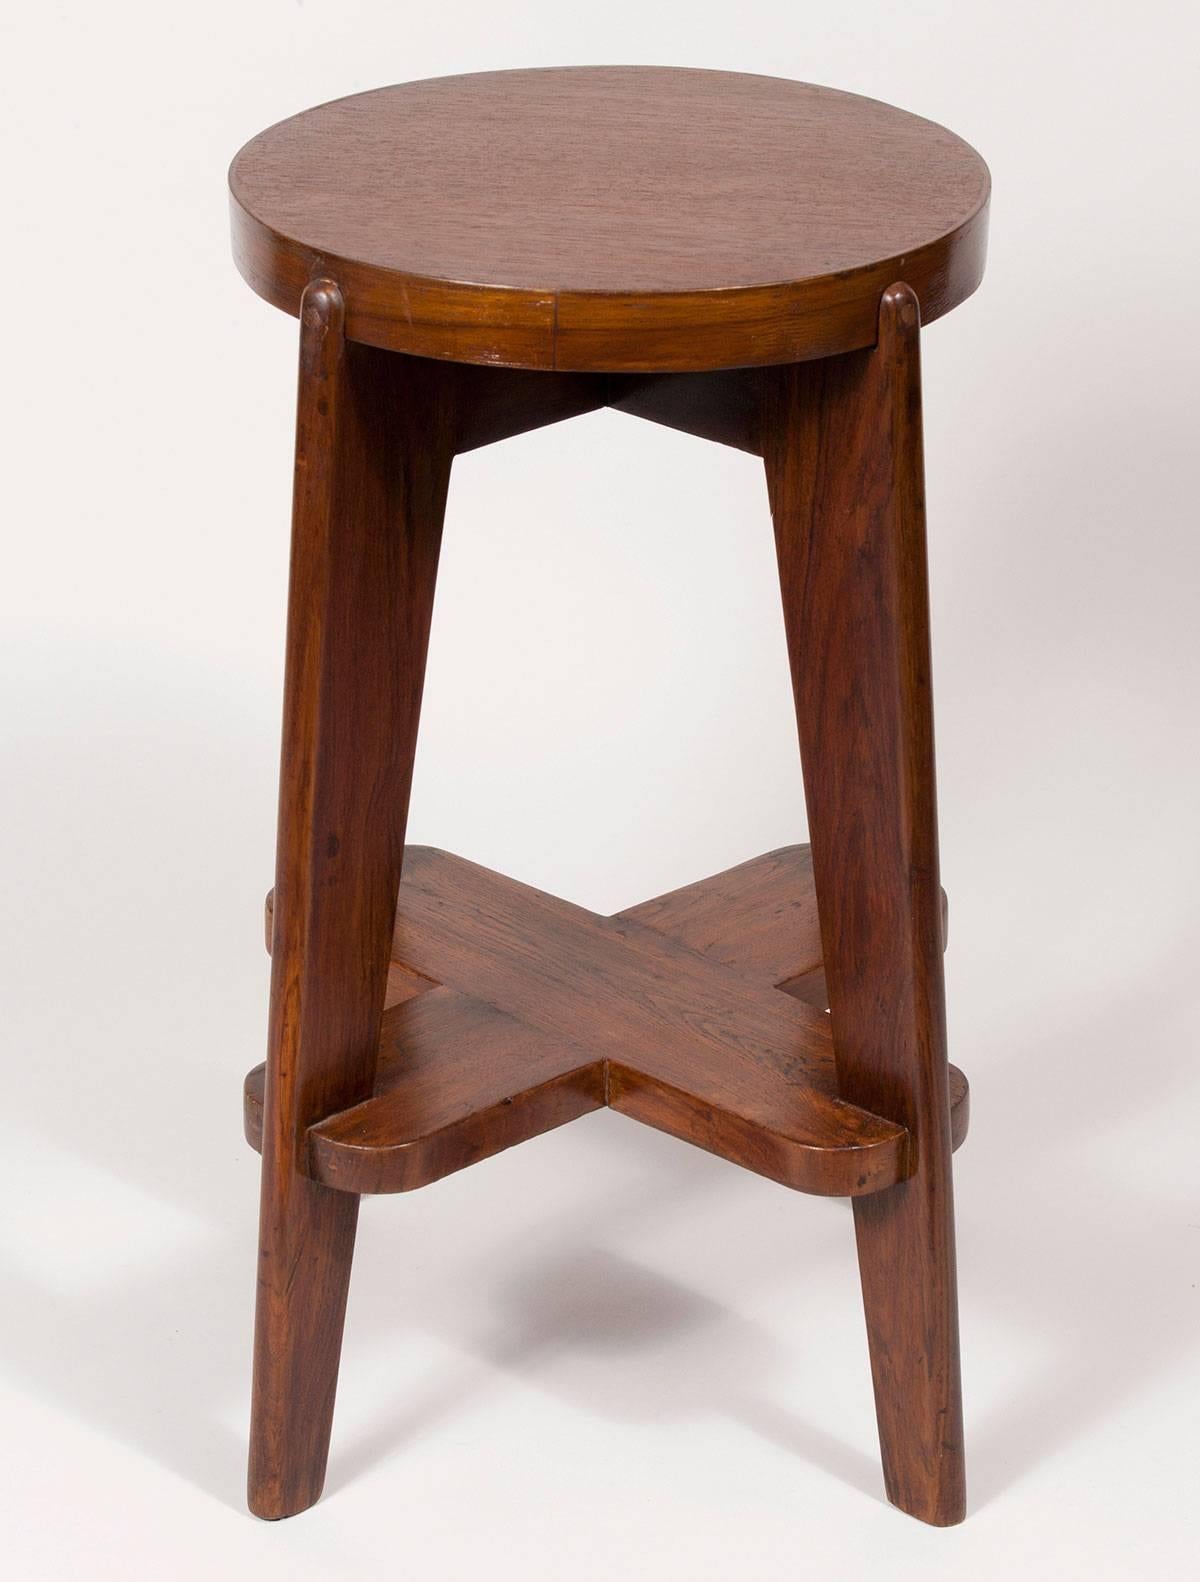 Solid Indian teak bar stool by the Swiss architect Pierre Jeanneret. The stool is an original from the Modernist city of Chandigarh, India, which he designed with his cousin Le Corbusier. In addition to its singular beauty, Jeanneret's Chandigarh